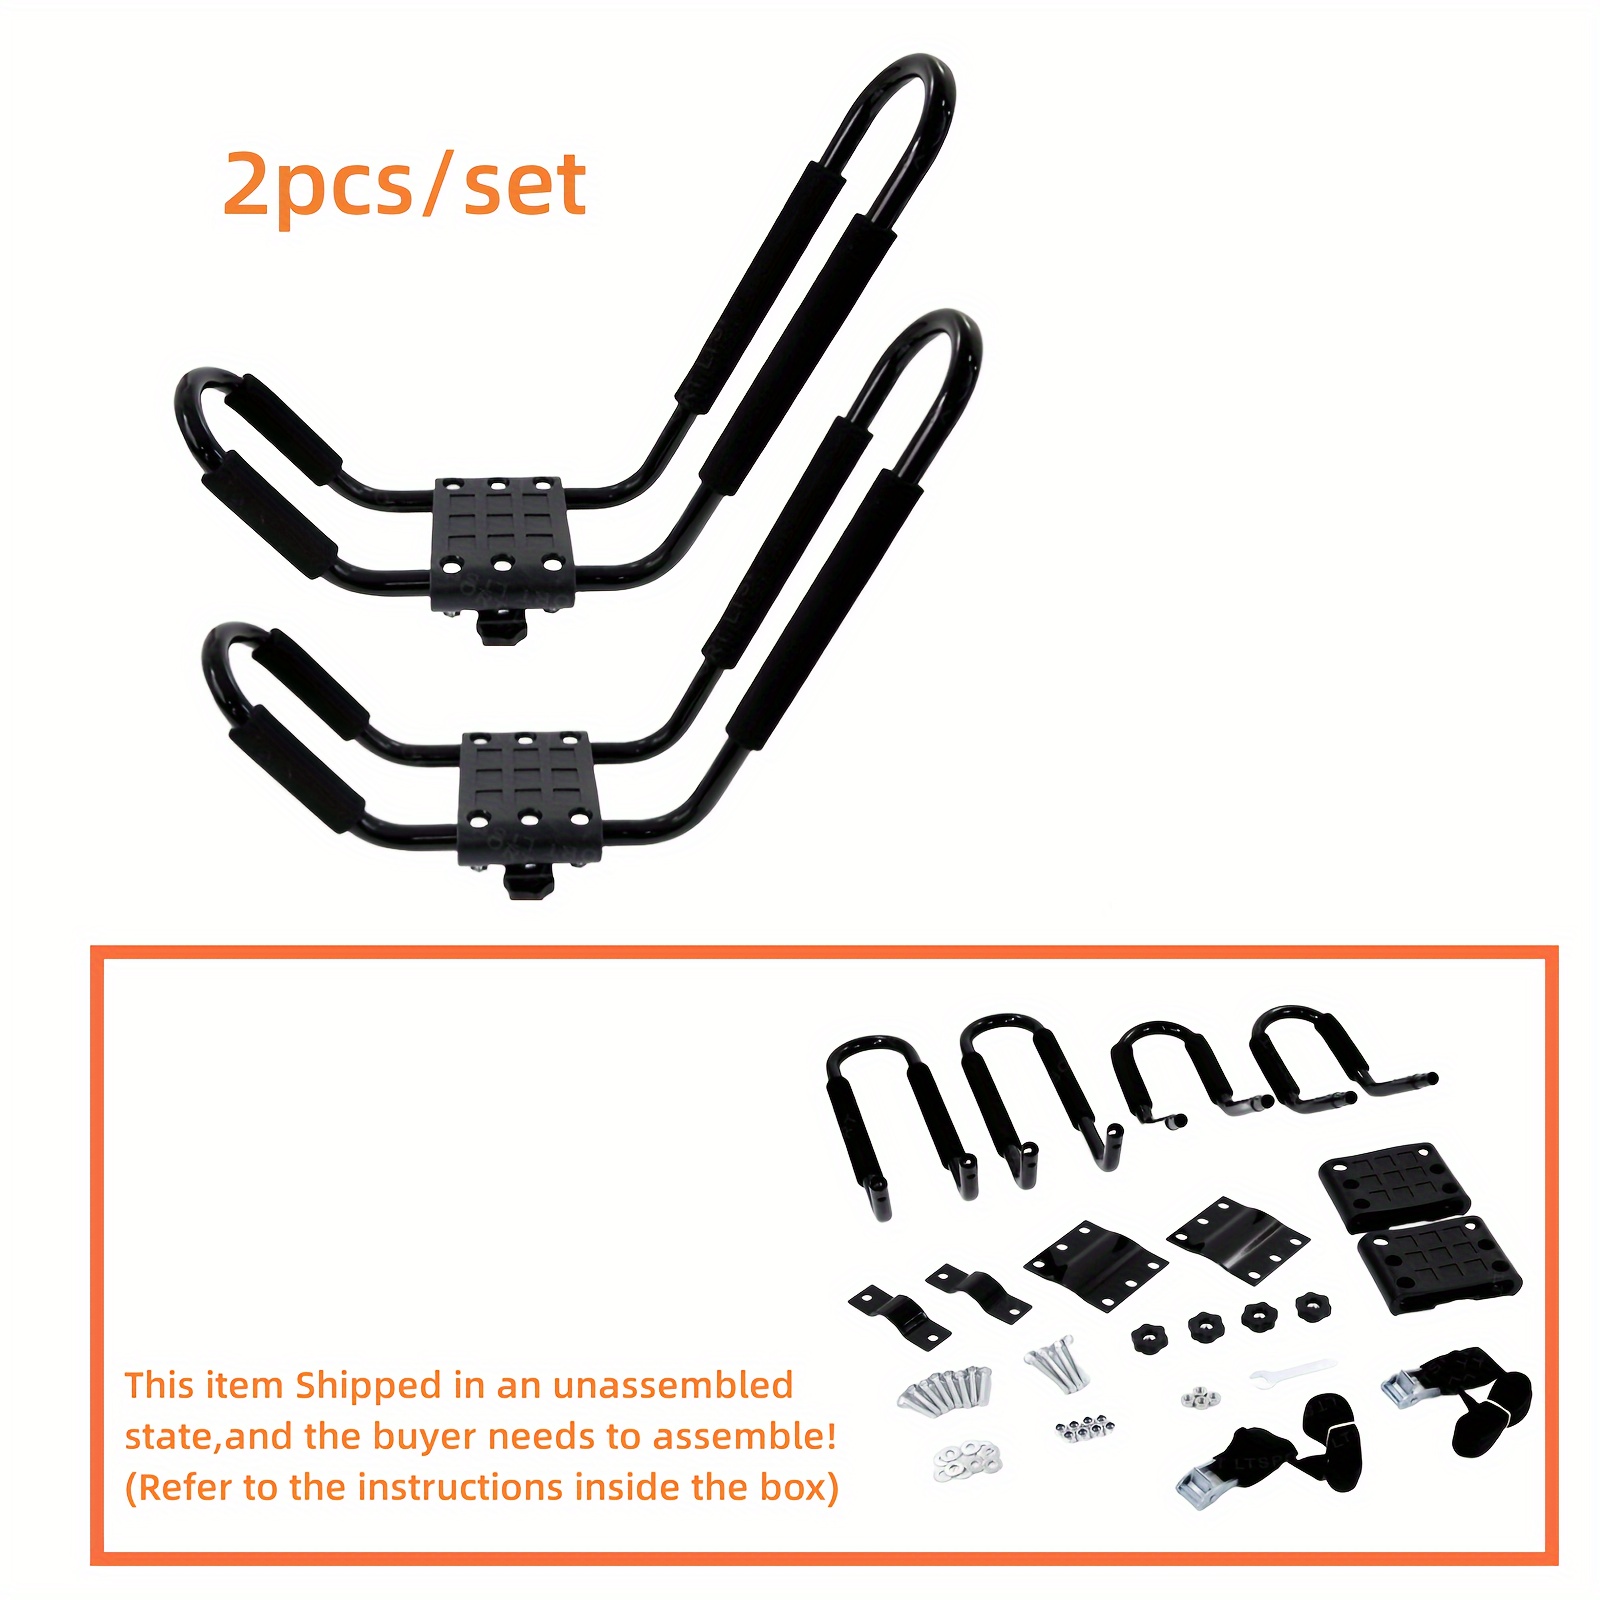 2 Pieces Kayak Roof Rack Universal Mount Cross Bar Carrier Roof Bars for  Boat with Strap